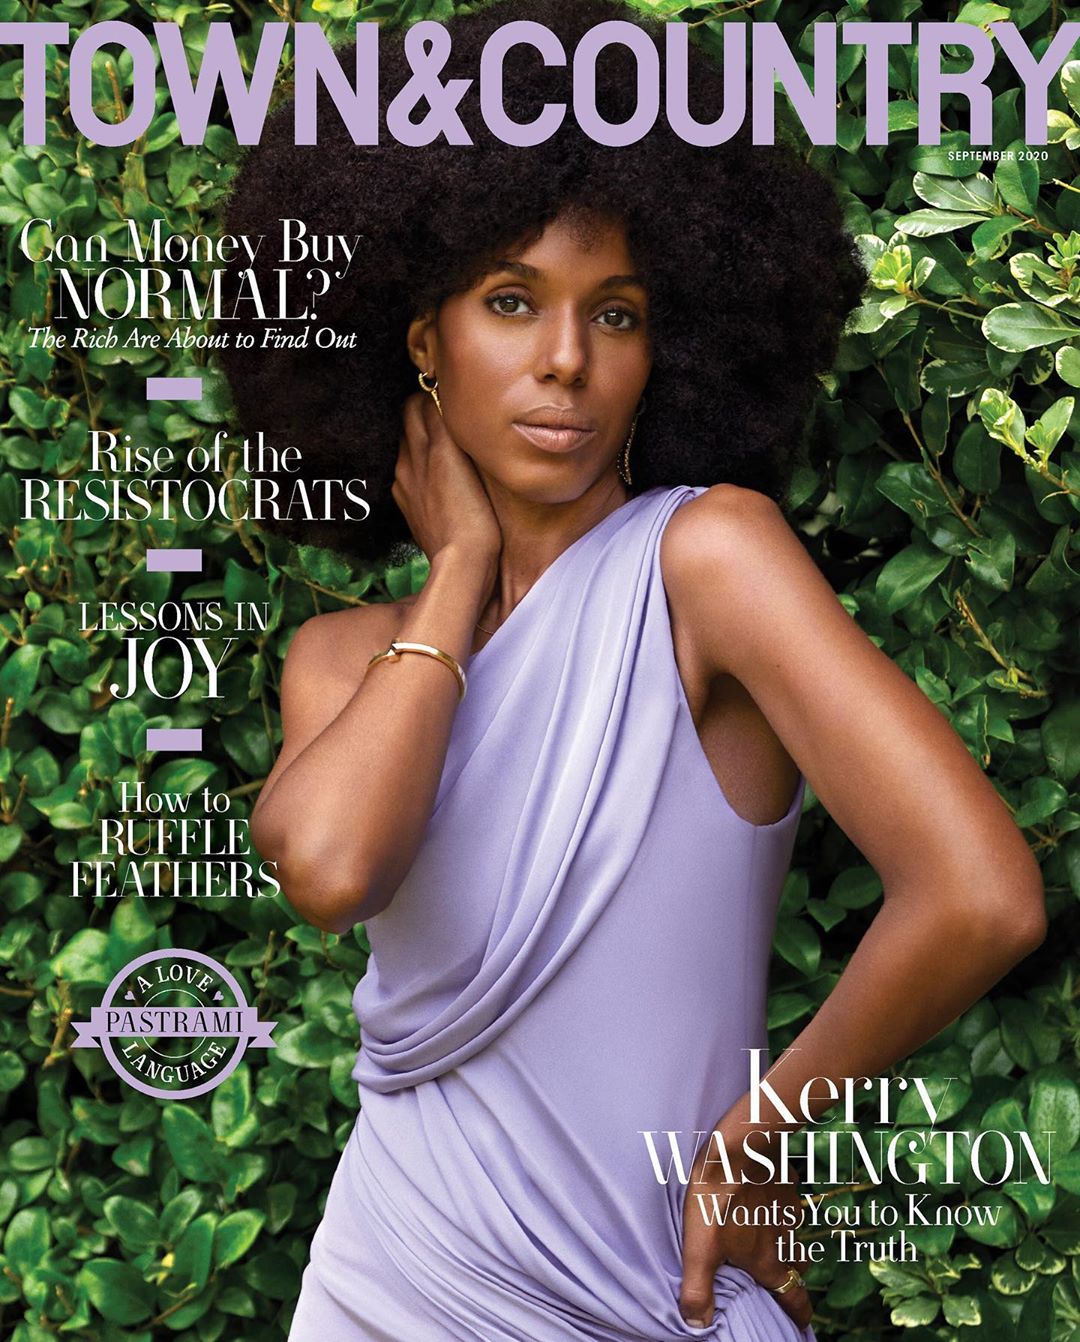 Kerry Washington on the Cover of Town and Country Magazine’s September Issue jaiyeorie